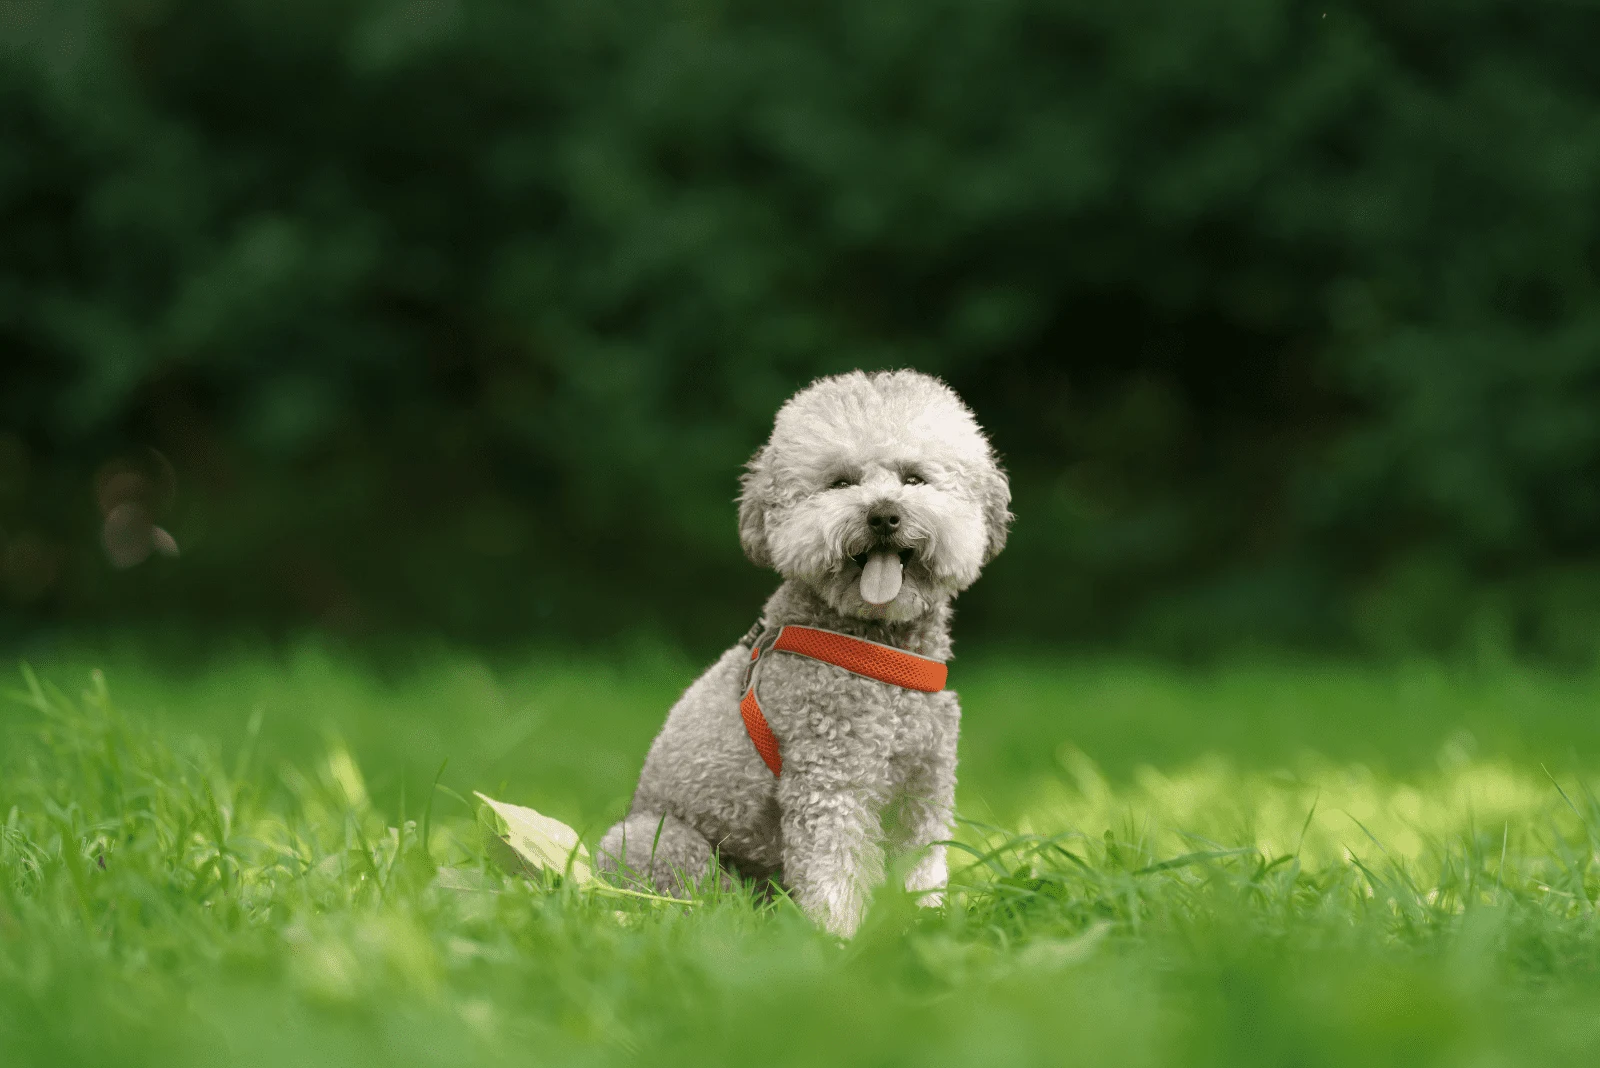 adorable poodle sitting in the grass and looking ahead